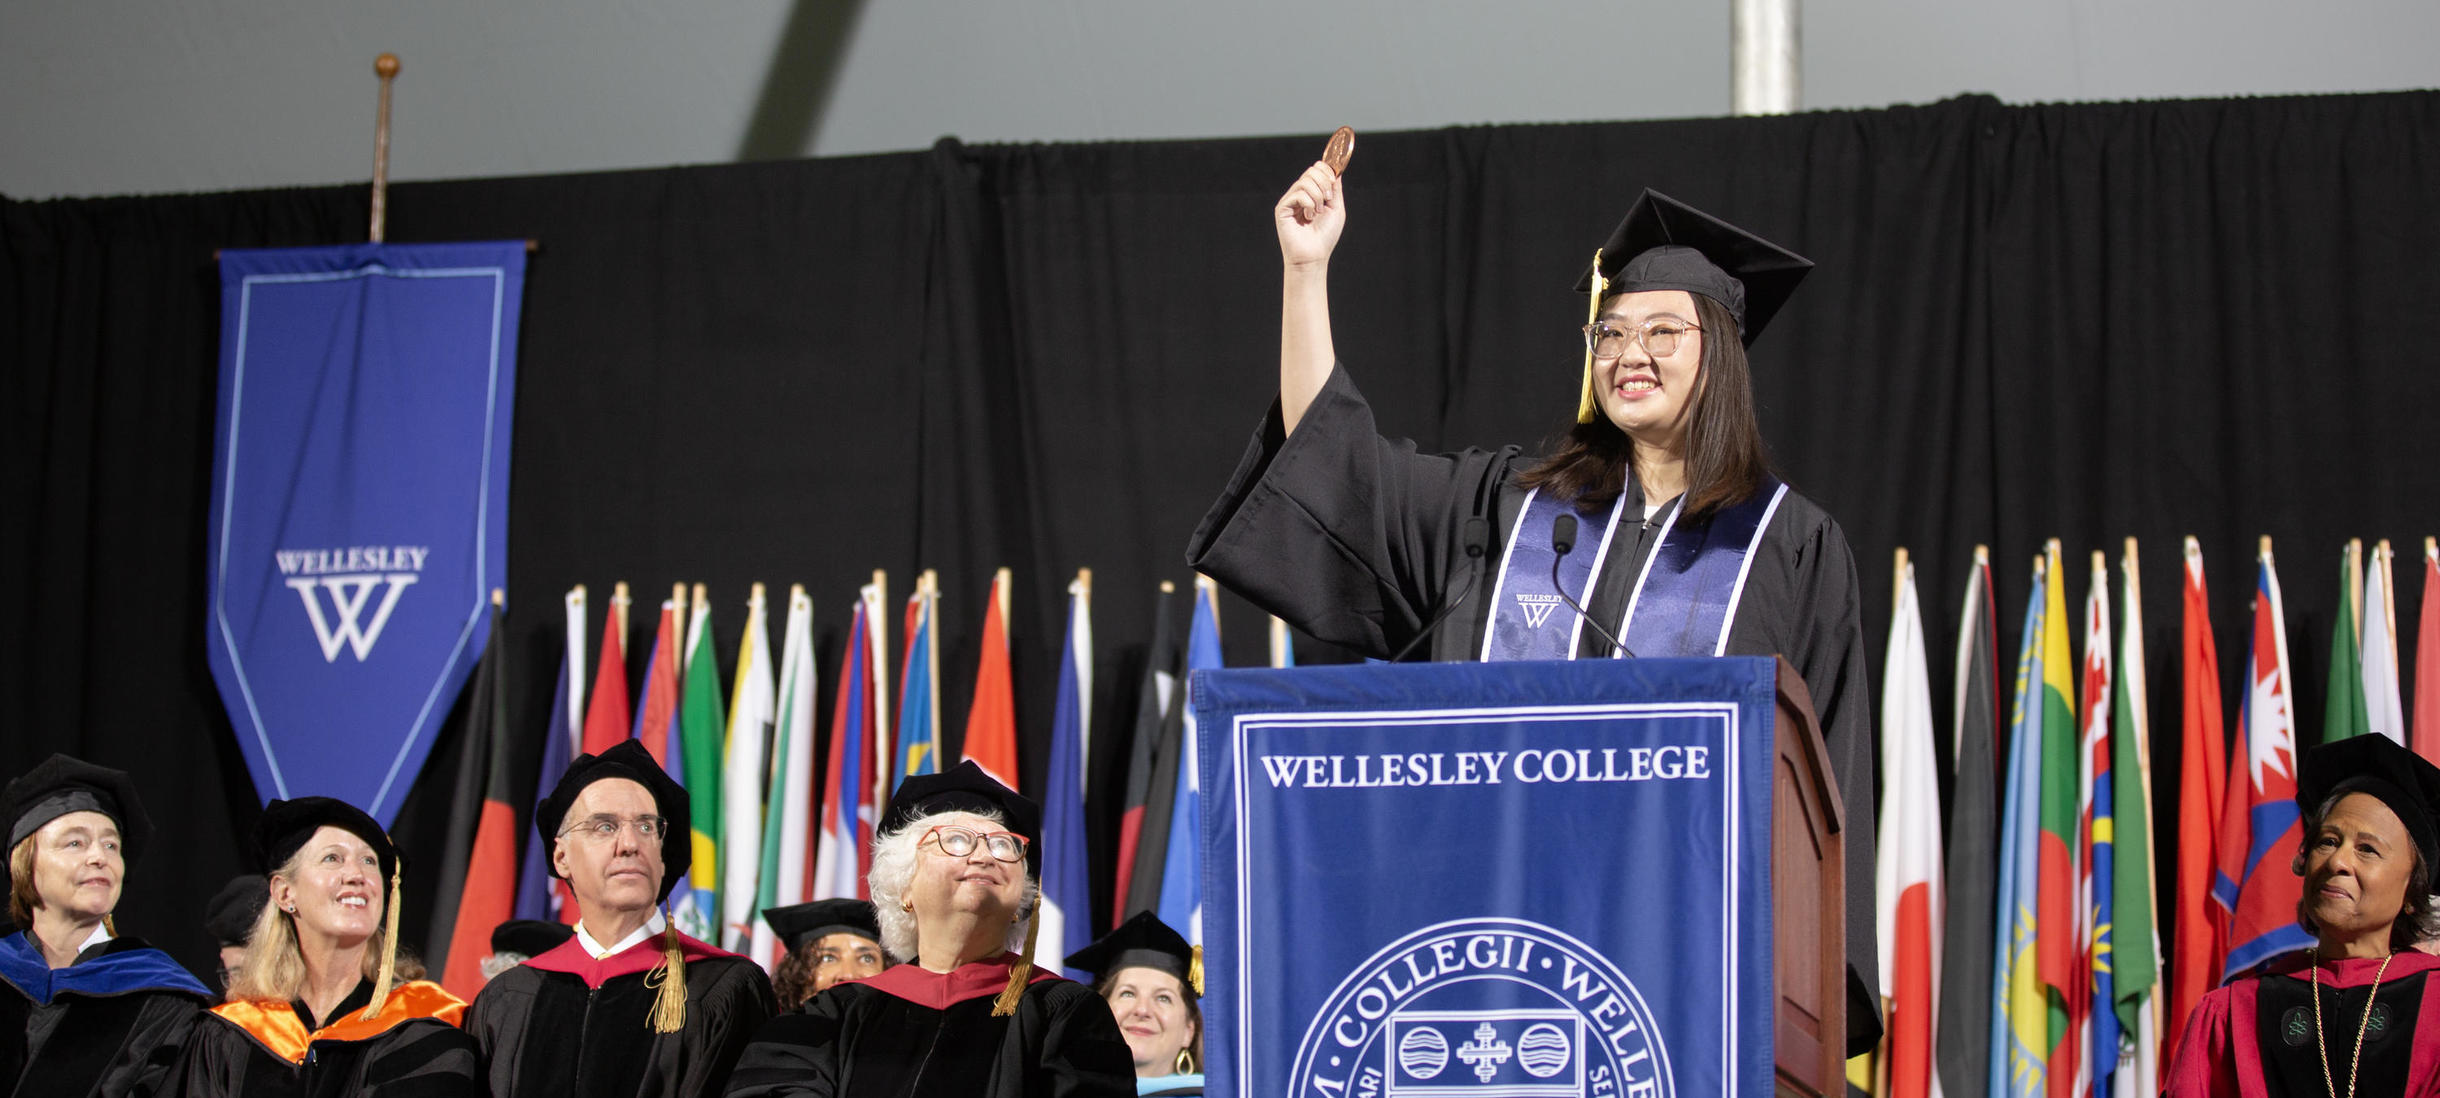 Student speaker Charlize Chen hold a giant penny aloft at the podium